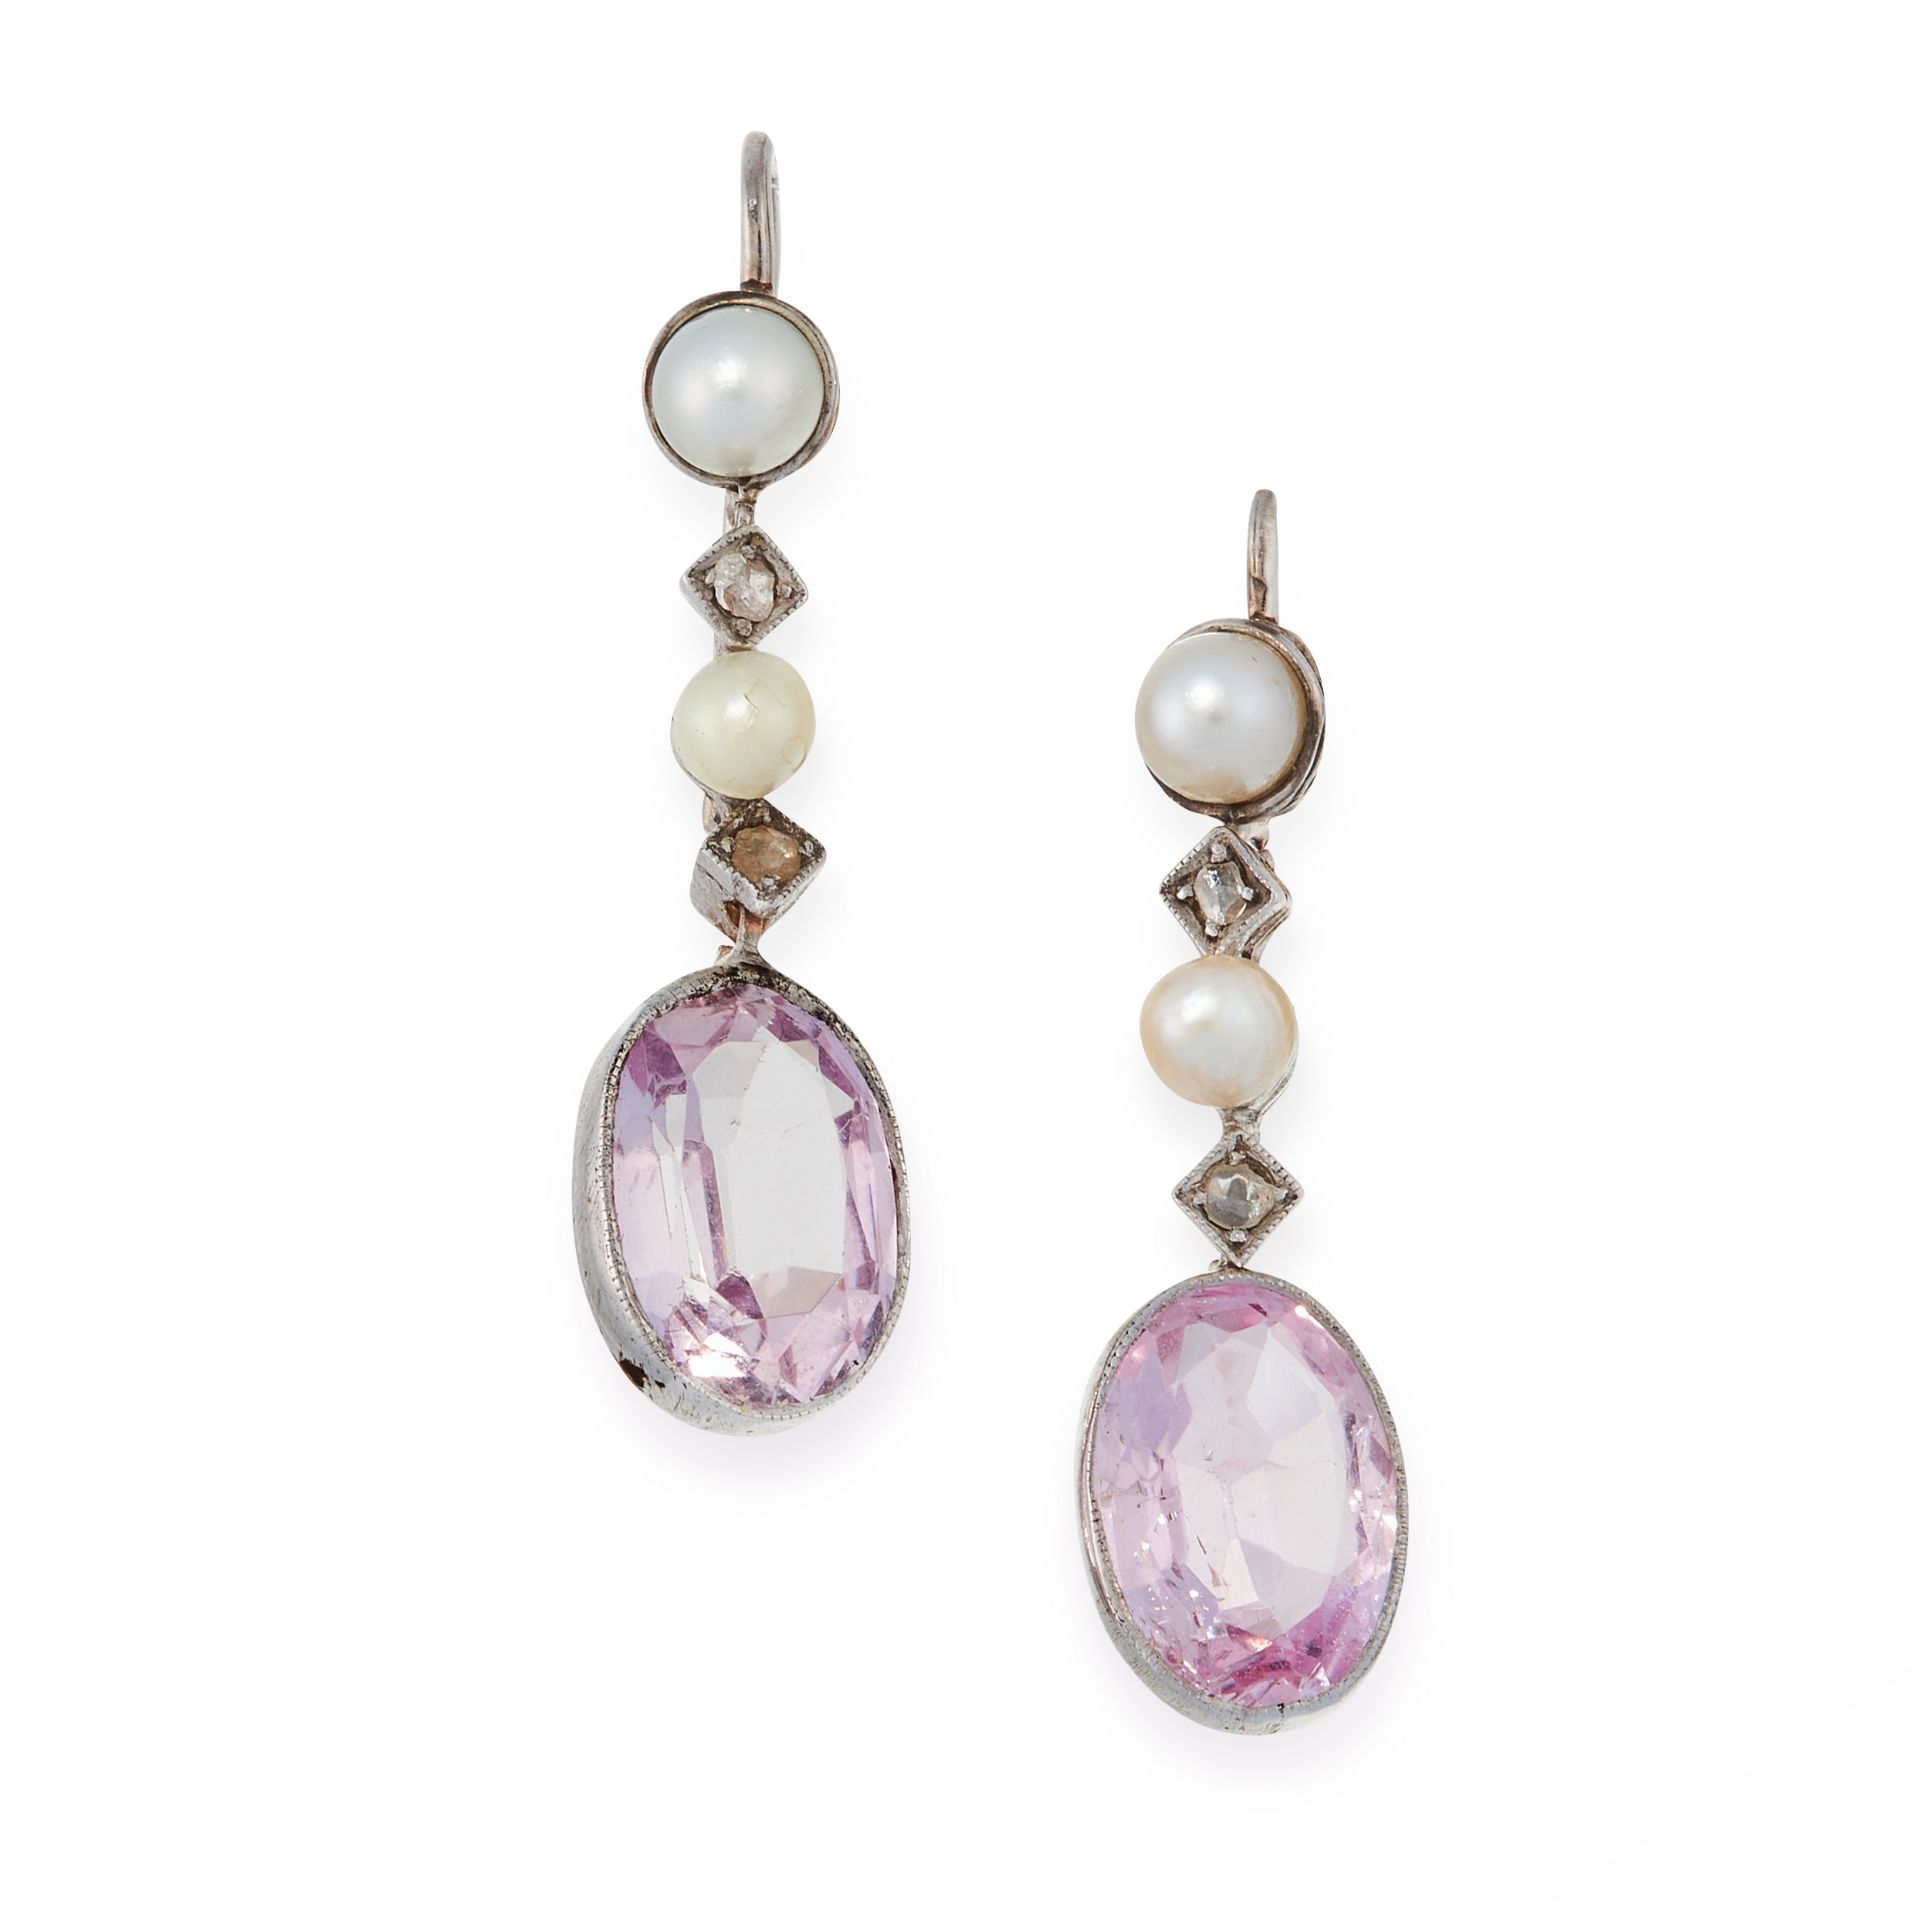 A PAIR OF PINK TOURMALINE, PEARL AND DIAMOND EARRINGS, EARLY 20TH CENTURY in platinum, each set with